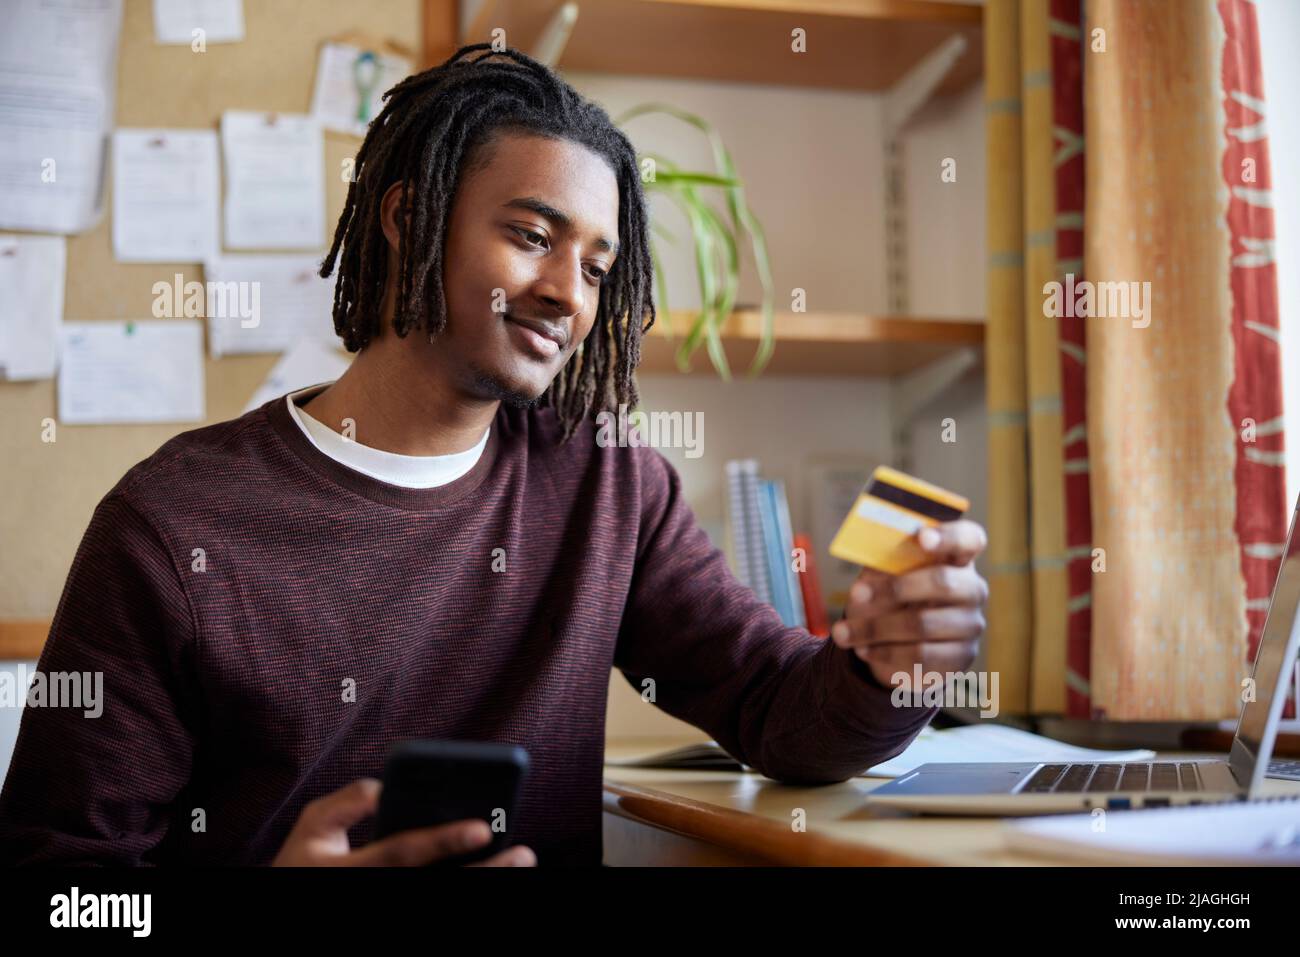 Male University Or College Student With Credit Card Making Online Purchase t At Desk In Room Stock Photo